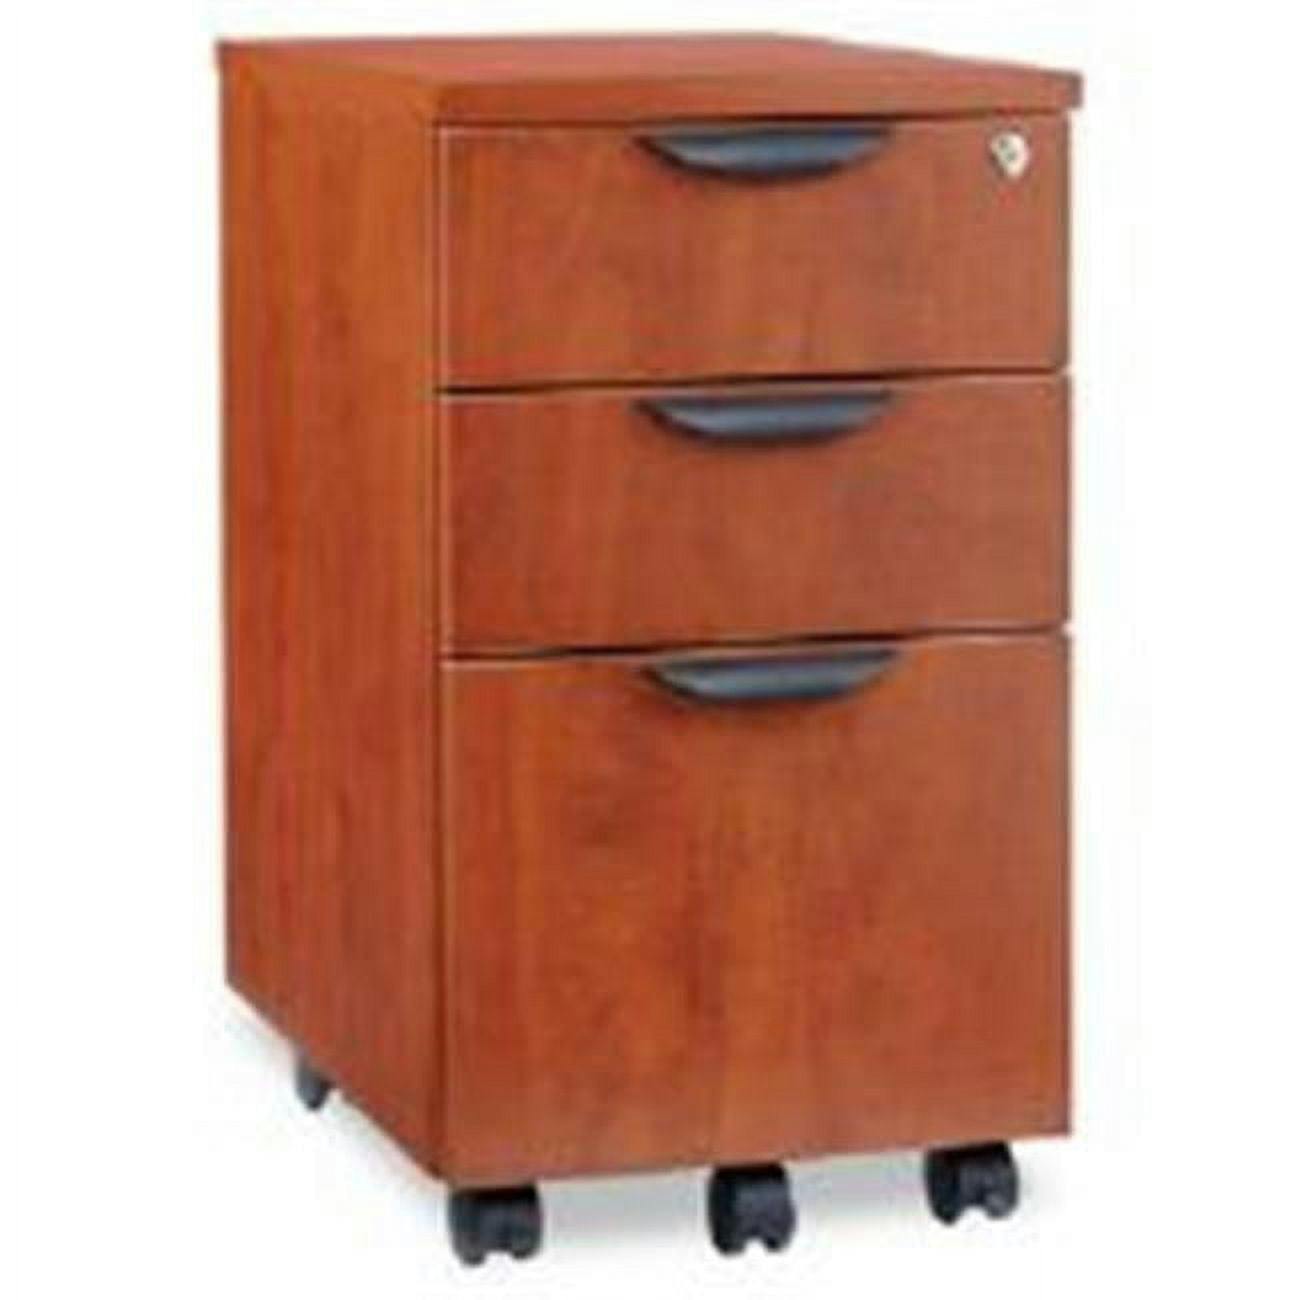 Cherry Woodgrain 3-Drawer Mobile Pedestal File Cabinet with Lock